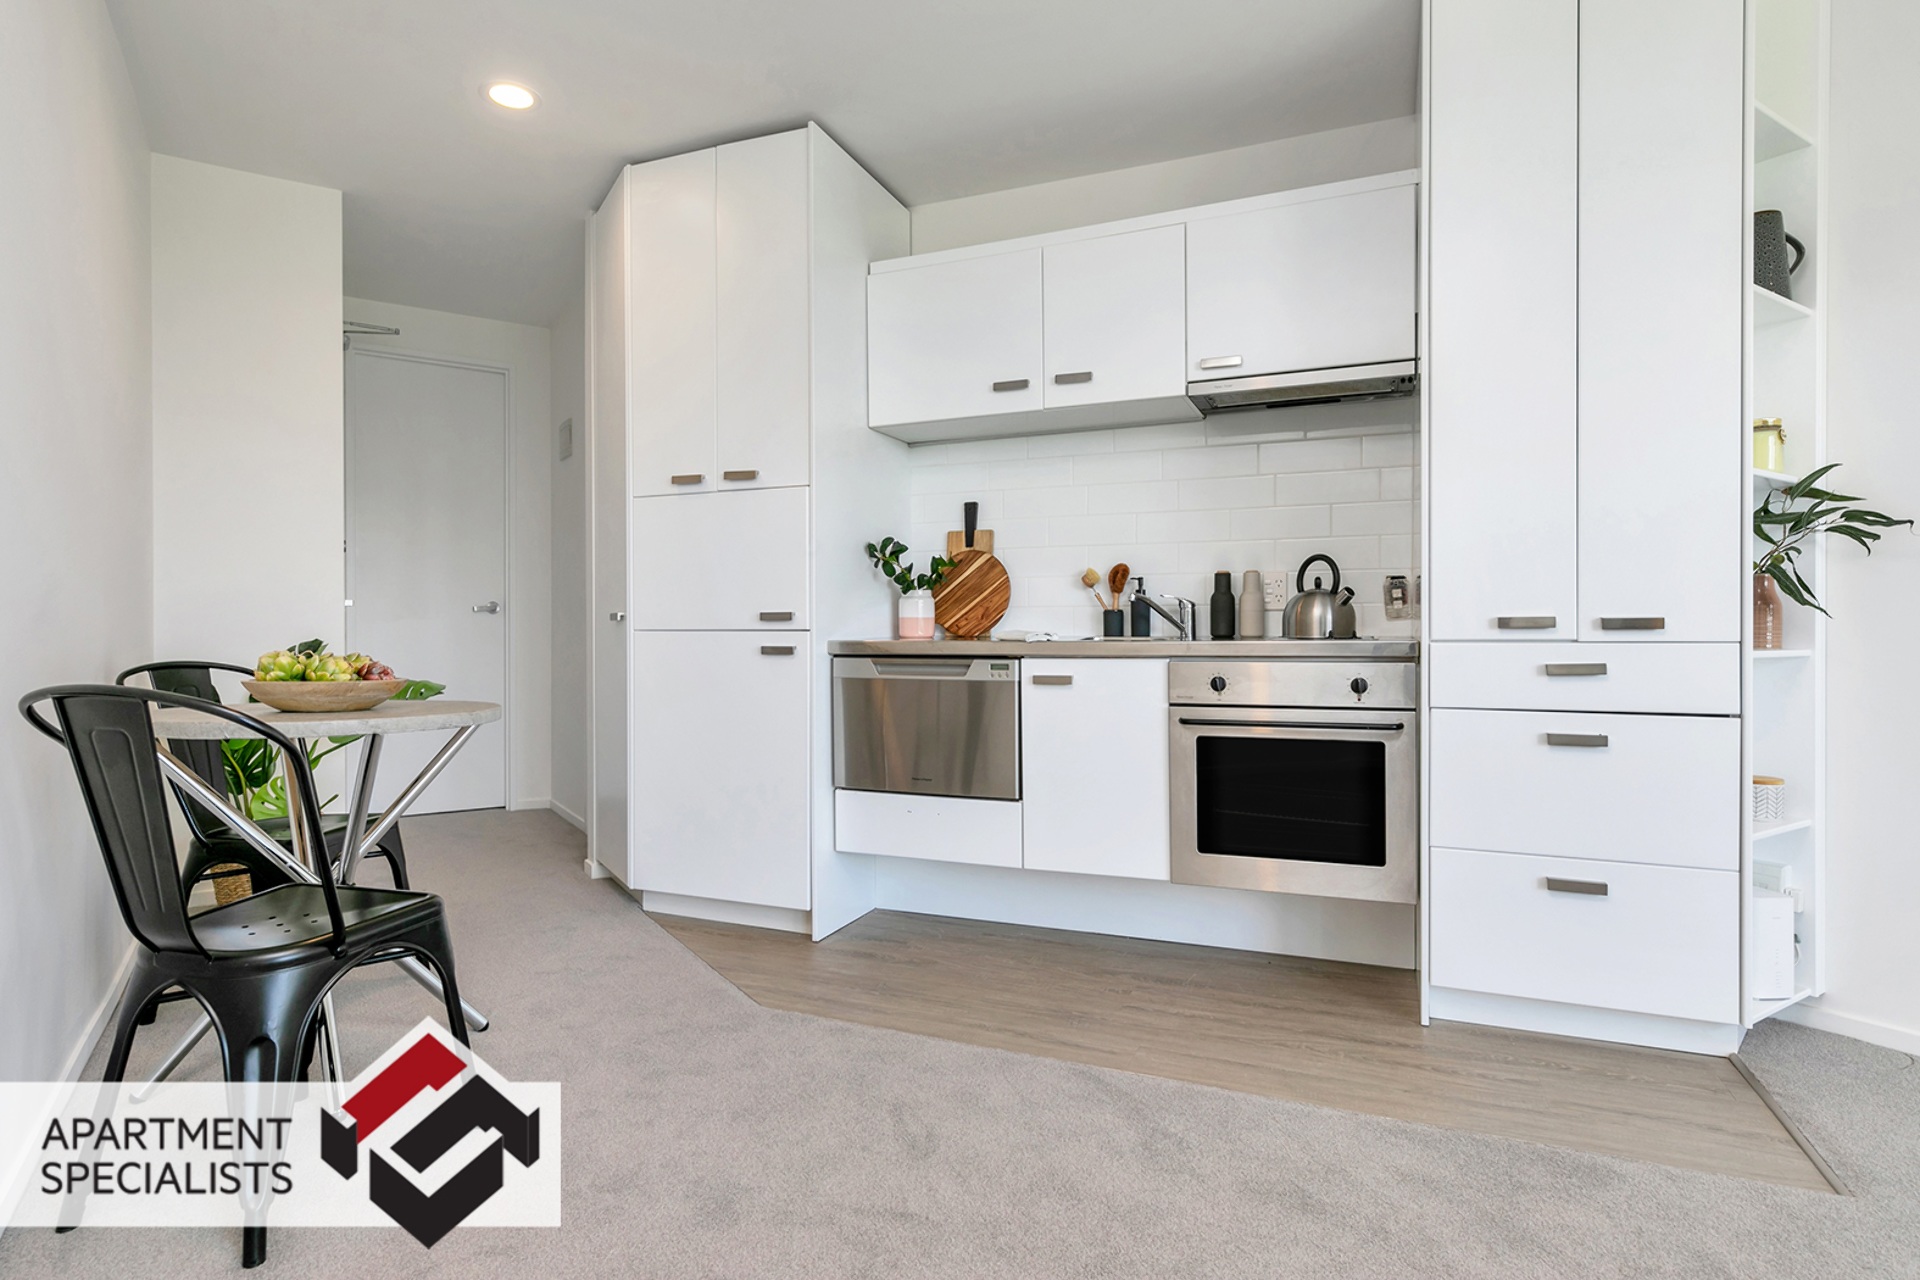 1 | 17 Blake Street, Ponsonby | Apartment Specialists